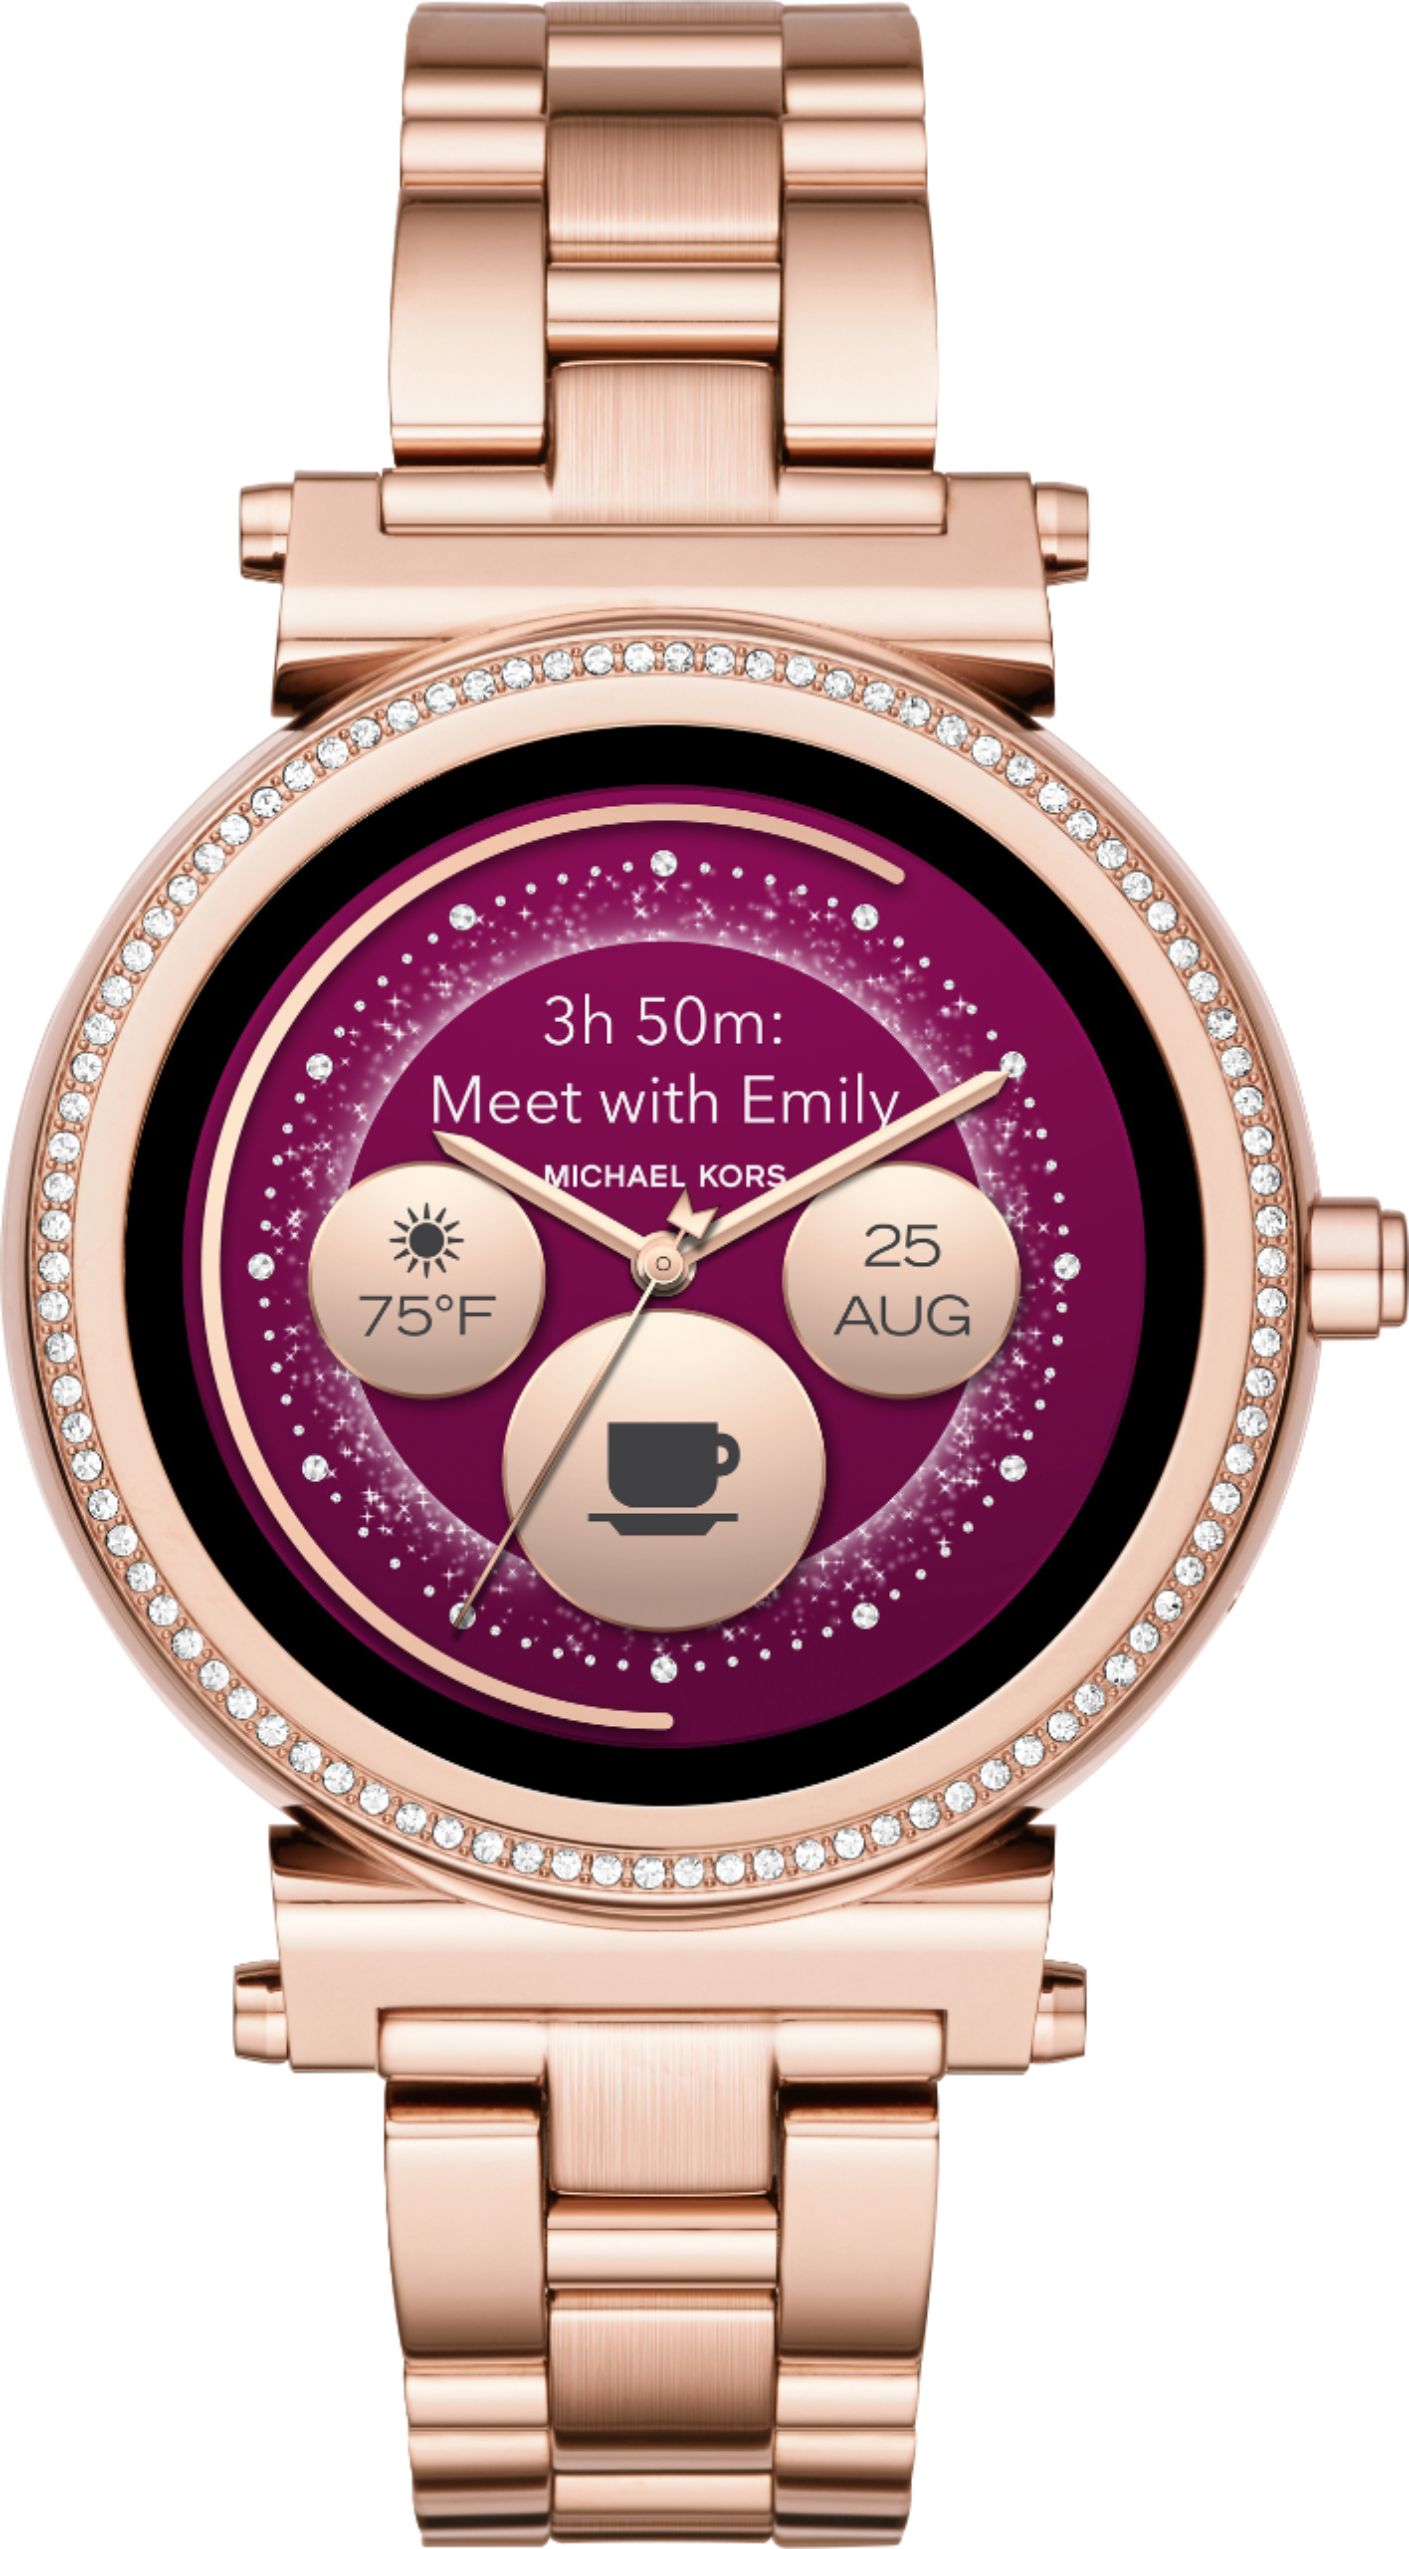 michael kors android watch best buy